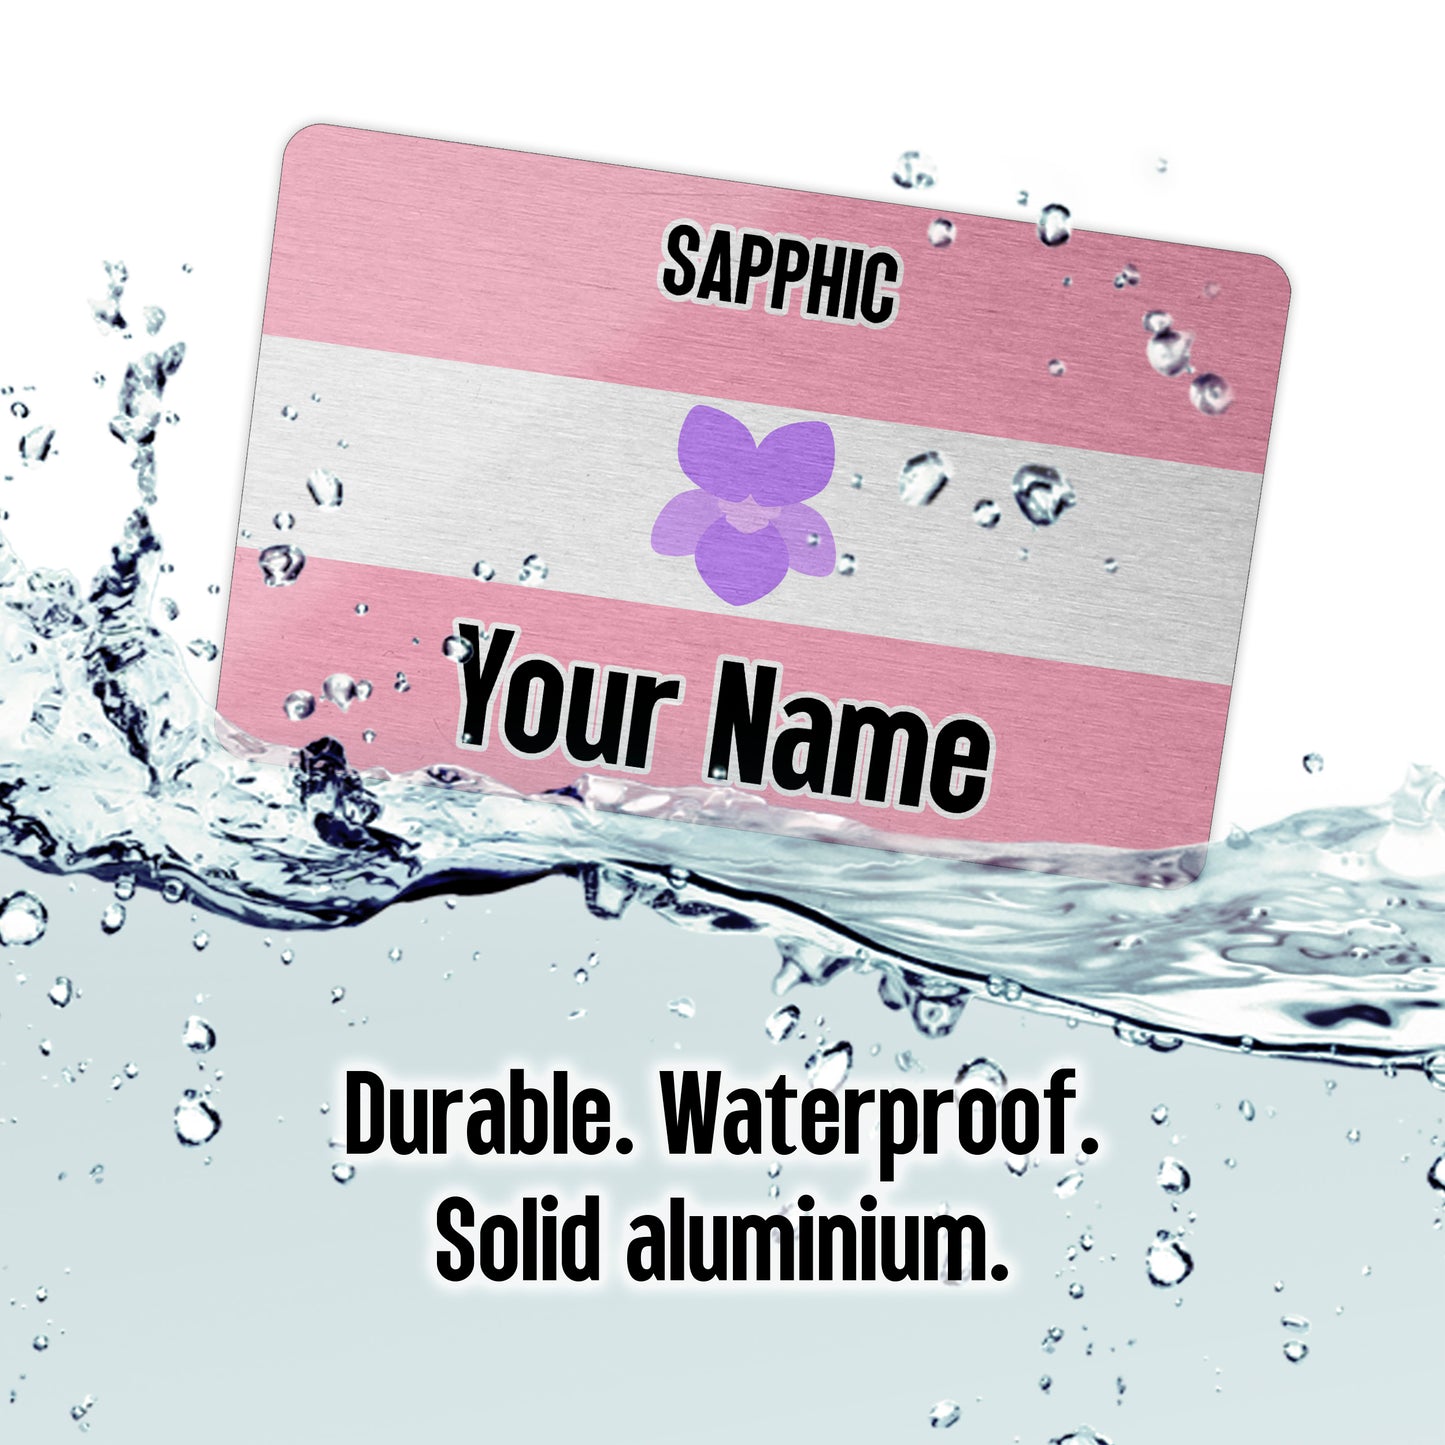 Aluminium metal novelty wallet card personalised with your name and the sapphic pride flag